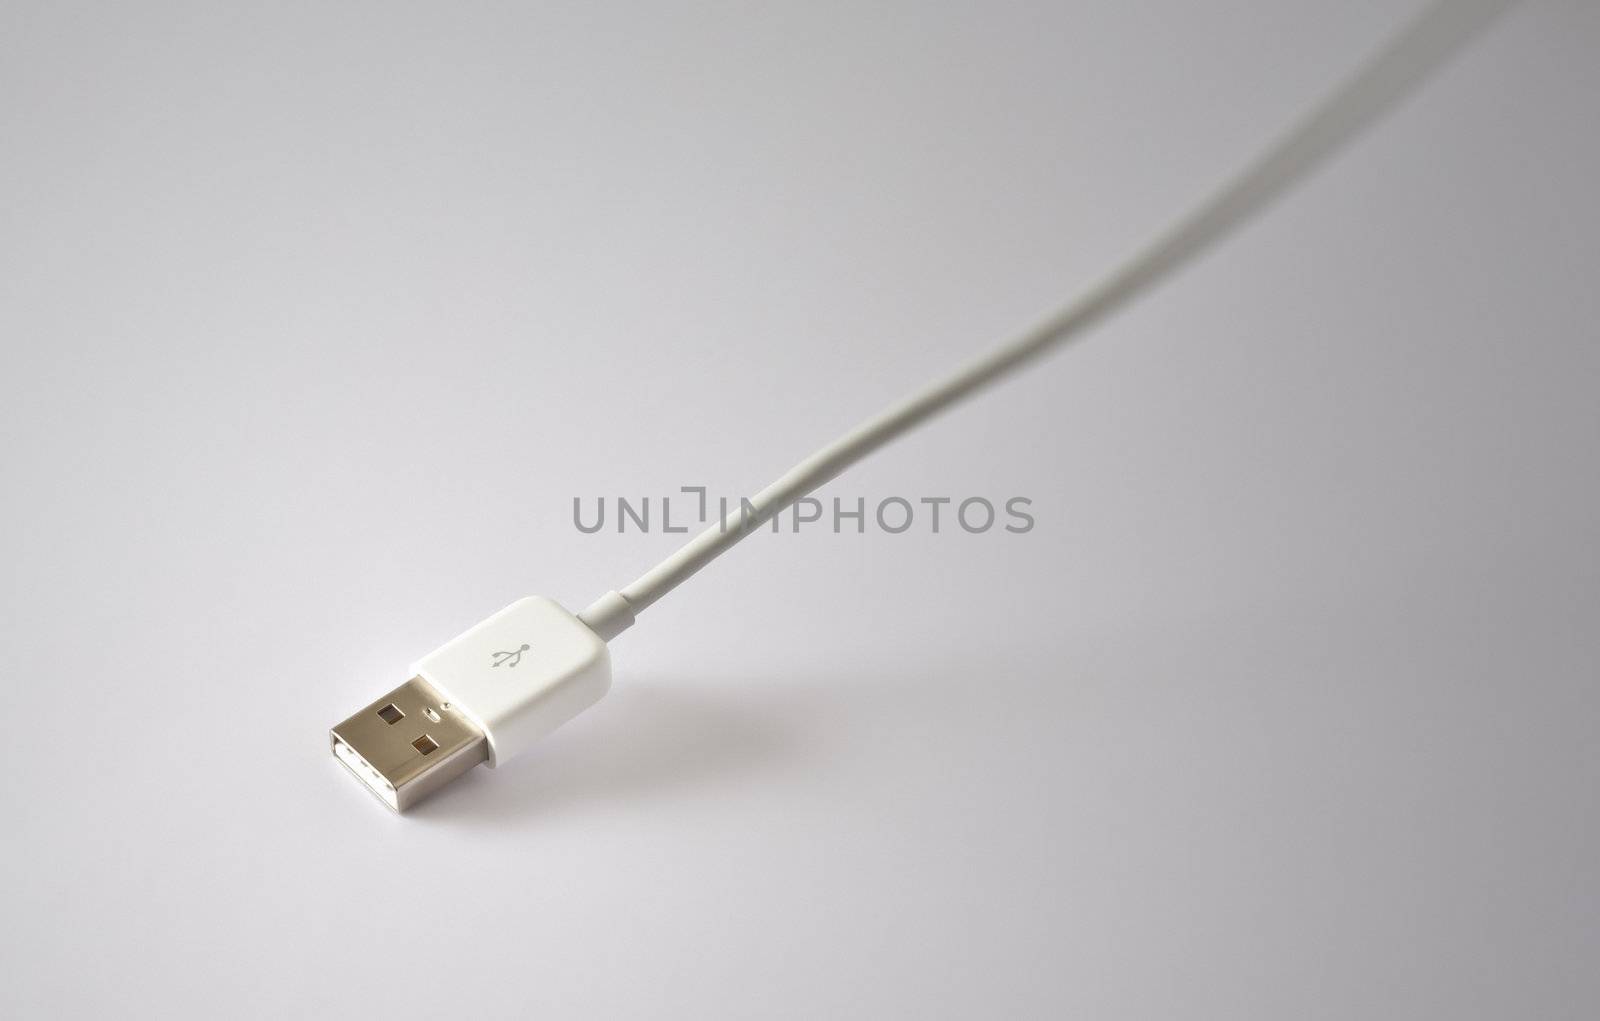 An image of a white usb cable